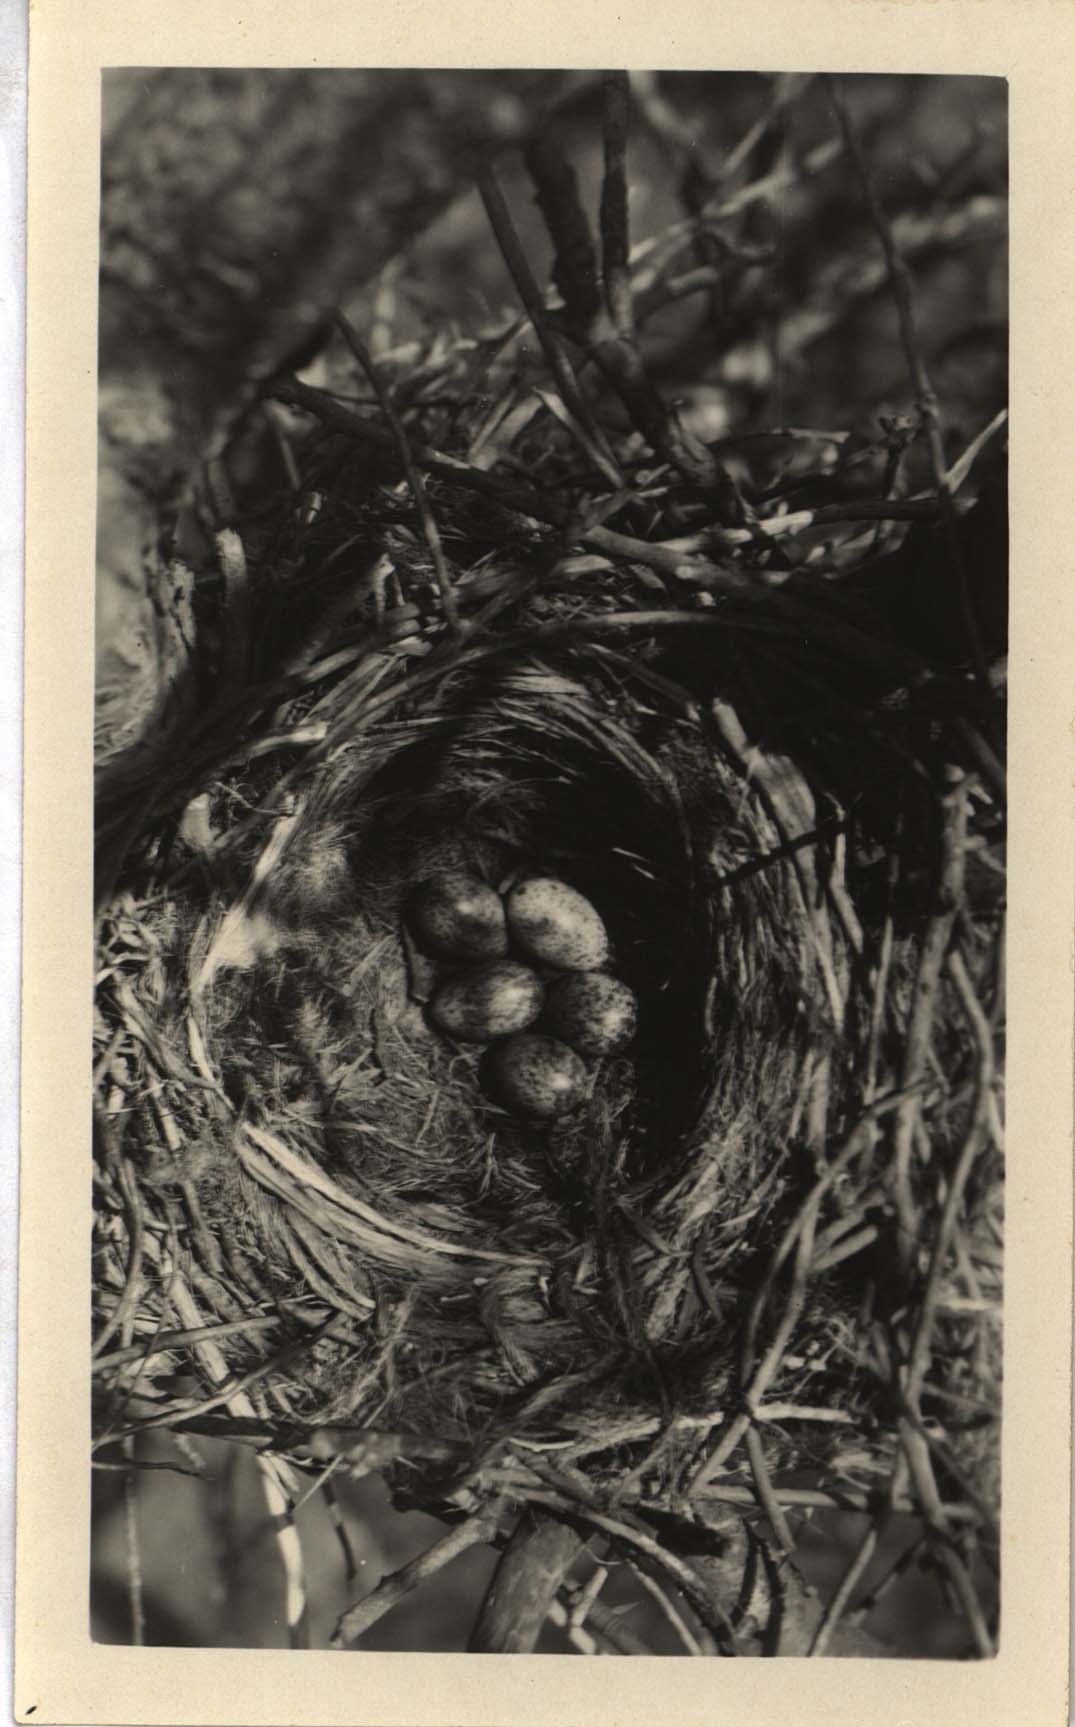 Photograph of eggs in a Crow nest